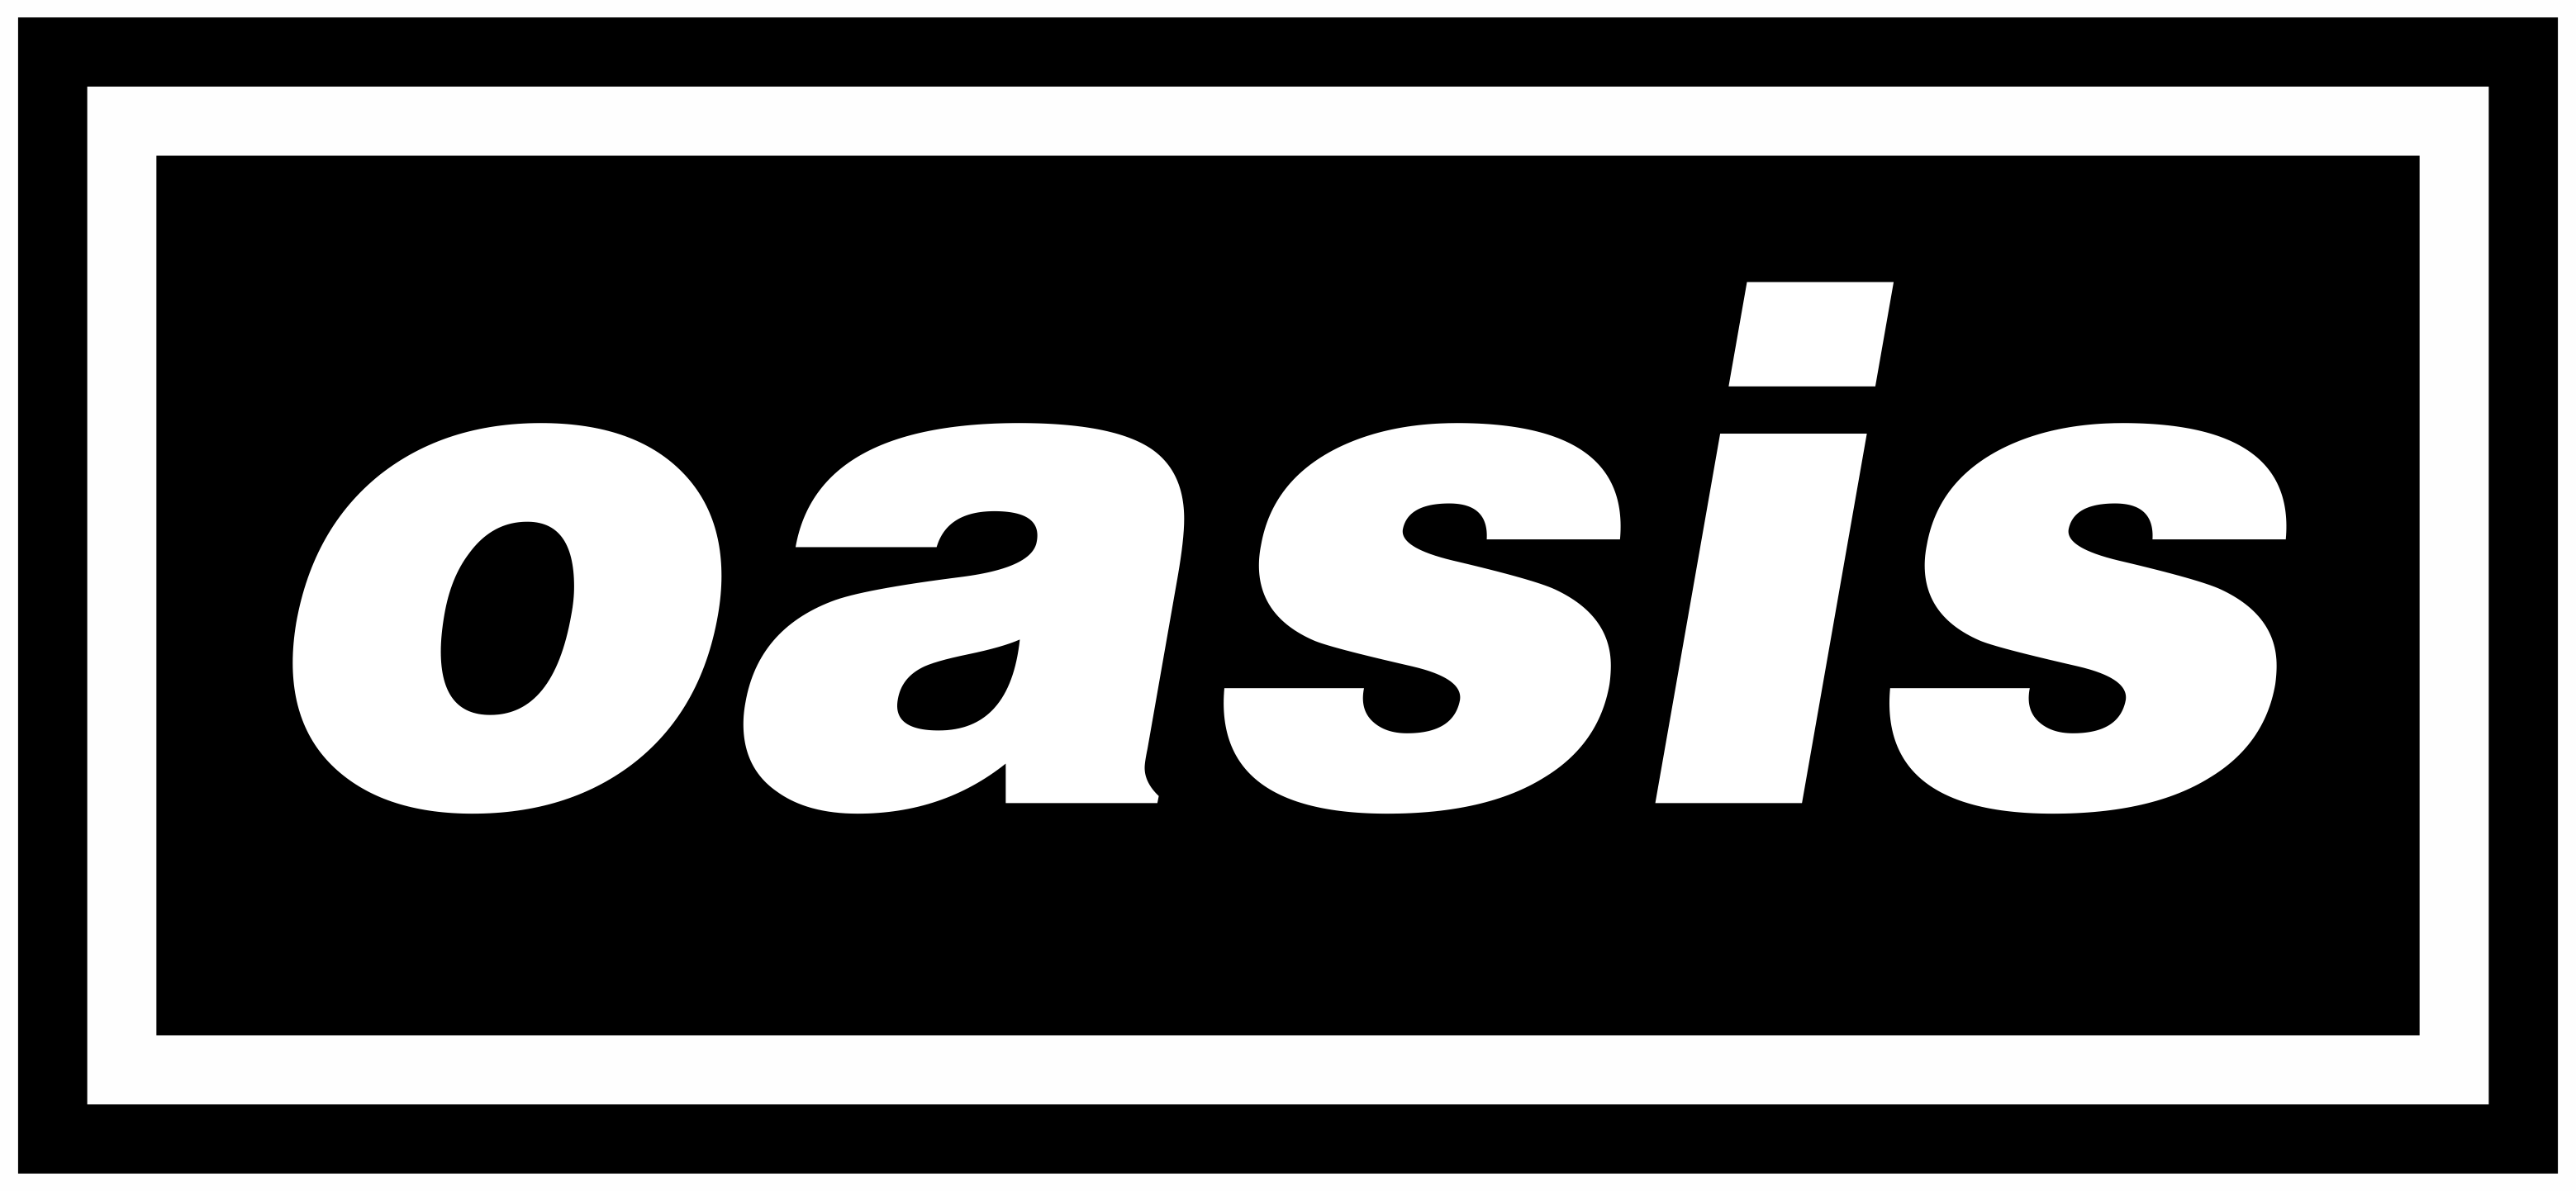 Oasis Logo - Anyone else really love the simplicity of the original Oasis logo